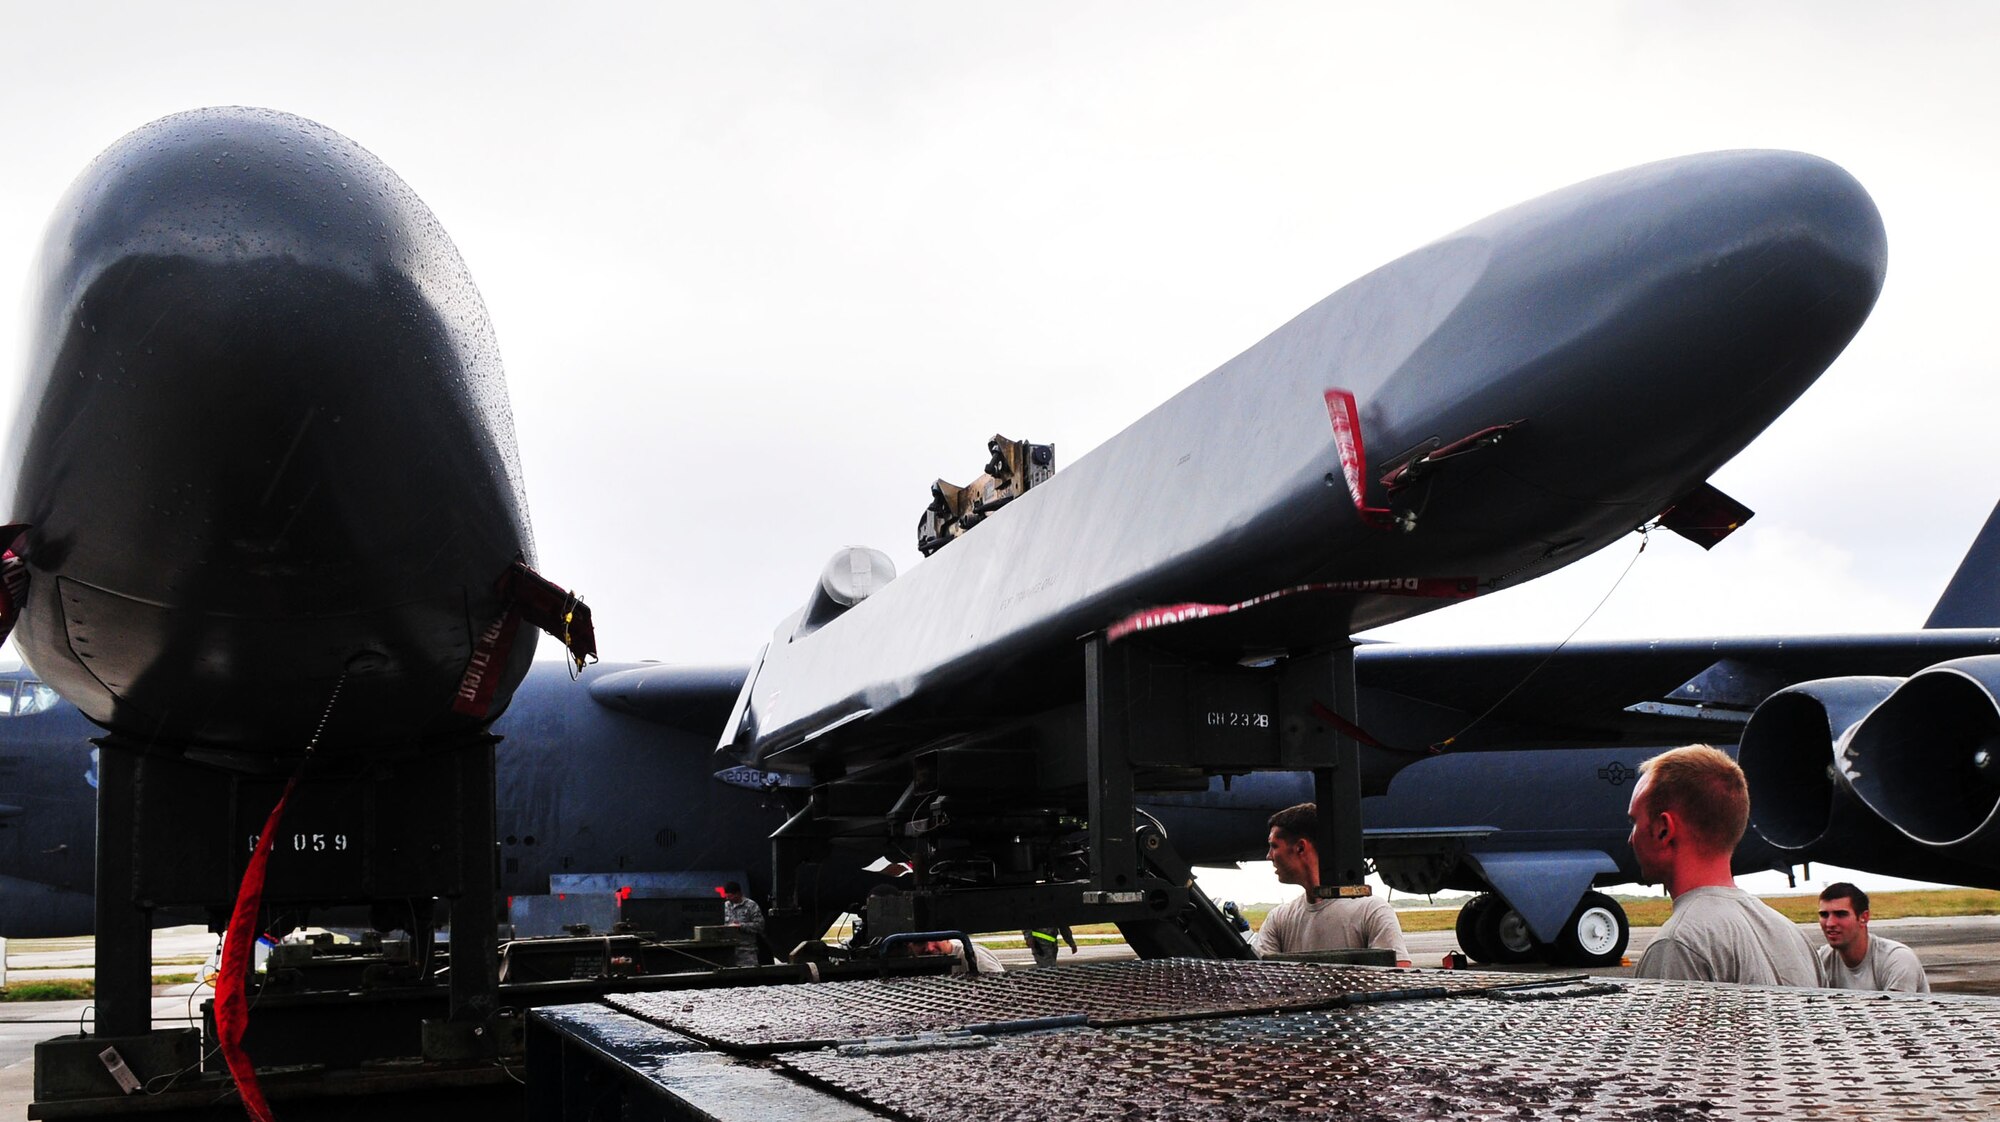 ANDERSEN AIR FORCE BASE, Guam - Airman from the 20 Expeditionary Aircraft Maintenance Squadron load a
conventional air launch cruise missile on to a B-52 during a recent
operational readiness exercise here.  The 20th EAMS is deployed to the 36th
Wing as part of U.S. Pacific Command's continuous bomber presence.  The
mission of the 36th Wing is to employ, deploy, integrate and enable air and
space forces from the most forward U.S. sovereign Air Force base in the
Pacific.  (U.S. Air Force photo by Airman 1st Class Julian North /Released)